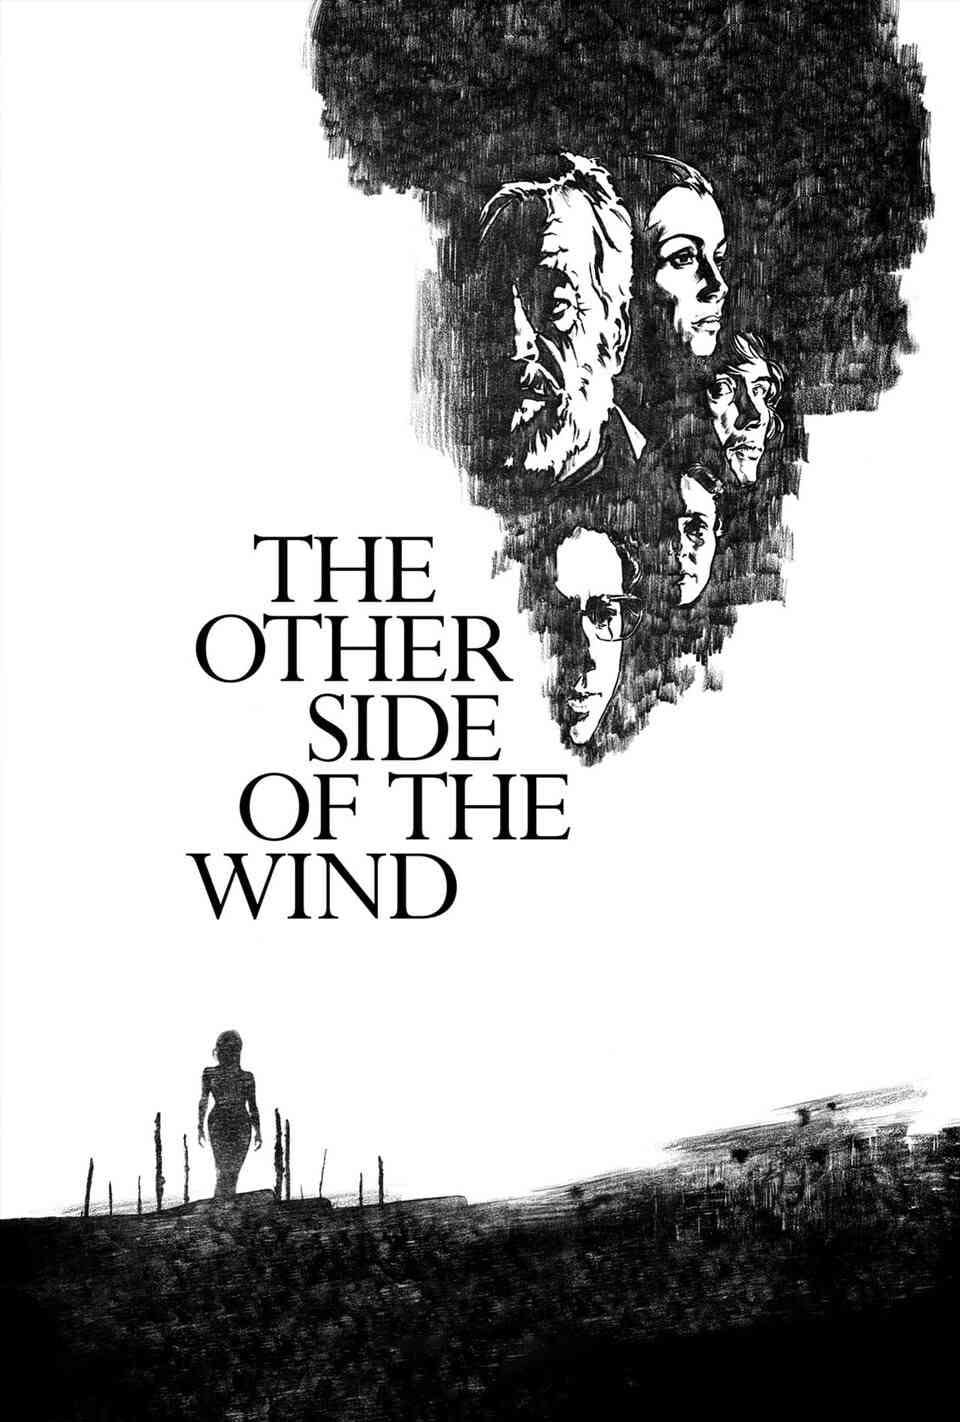 Read The Other Side of the Wind screenplay.